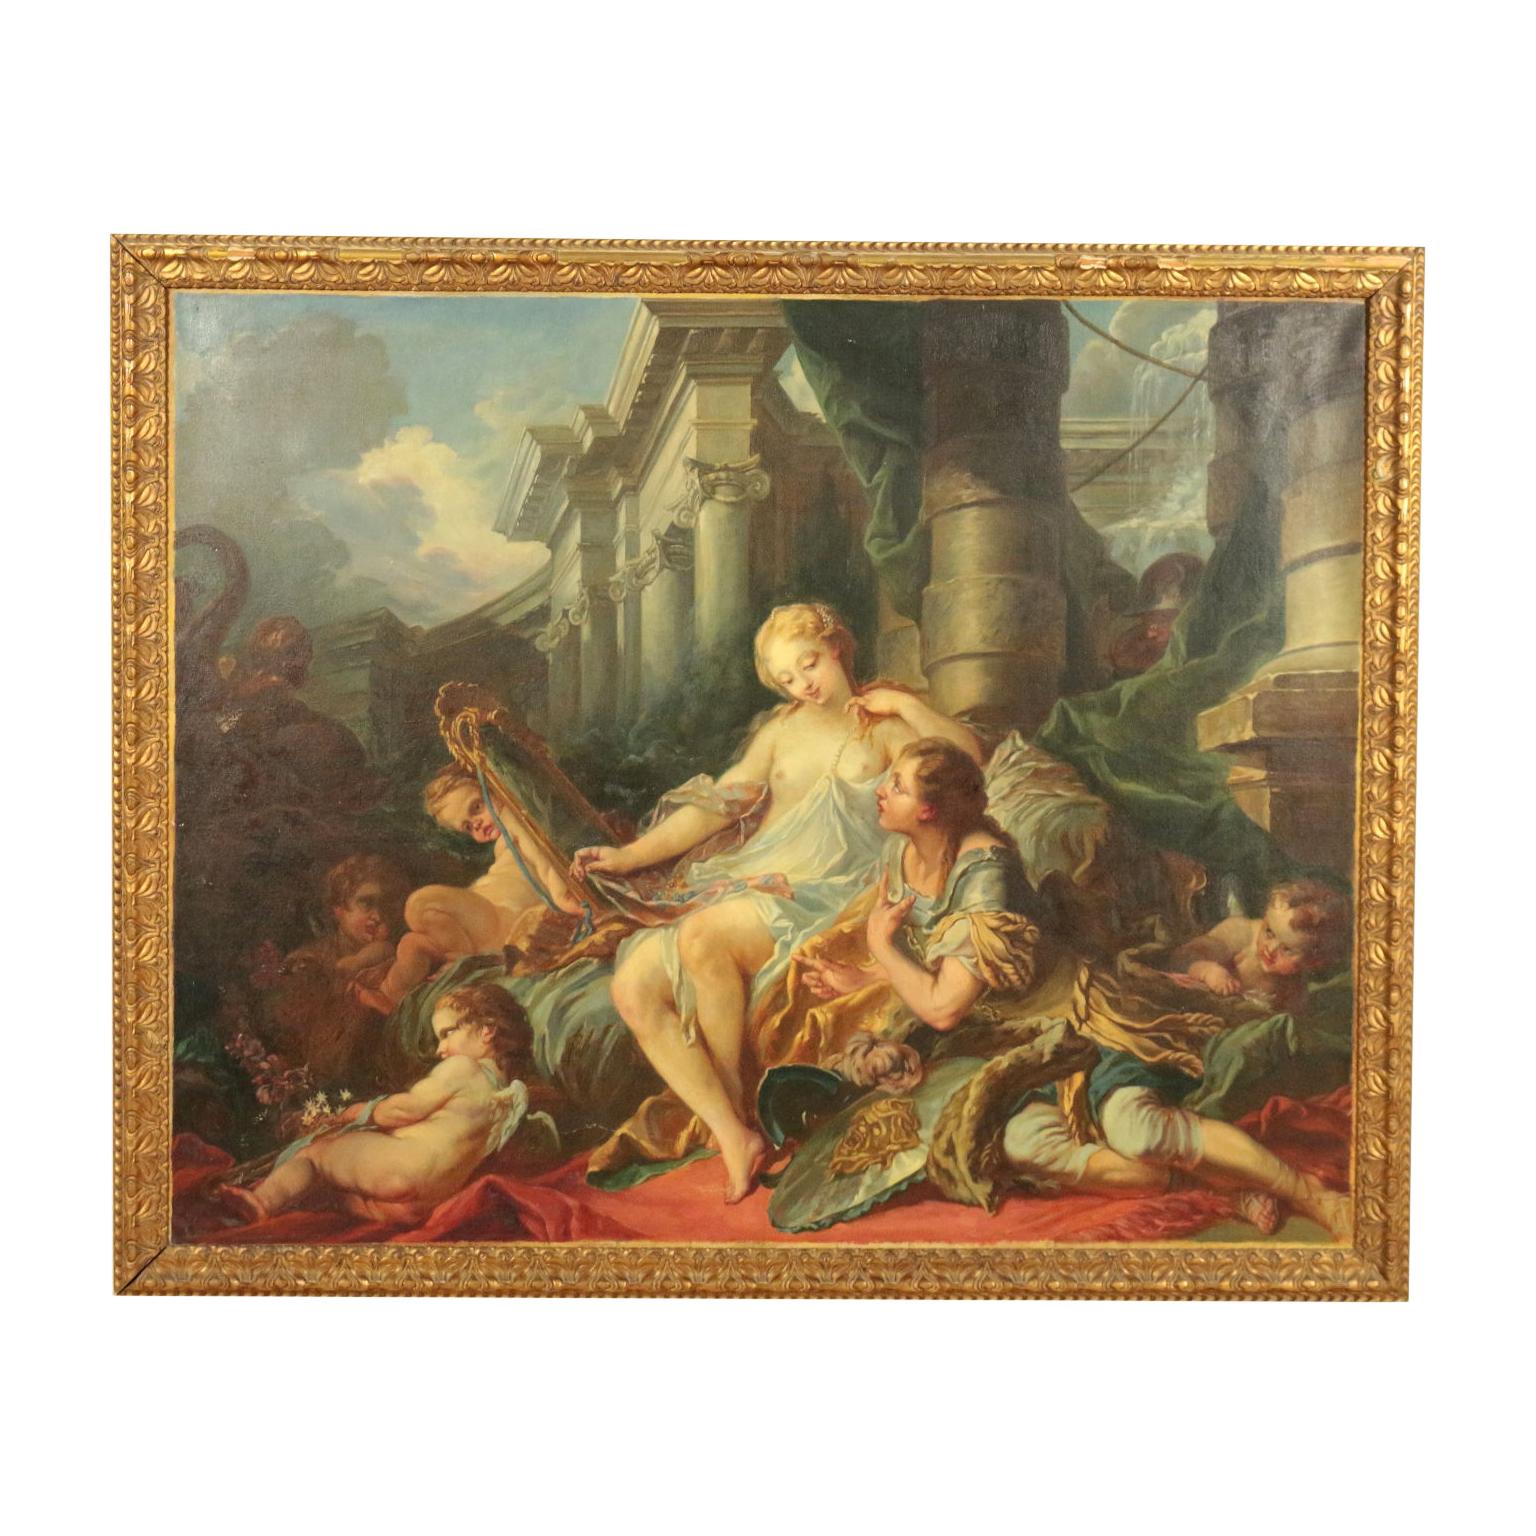 Unknown Figurative Painting - Rinaldo And Armida Oil On Canvas Late '800 Early '900, Copy From François Bouche